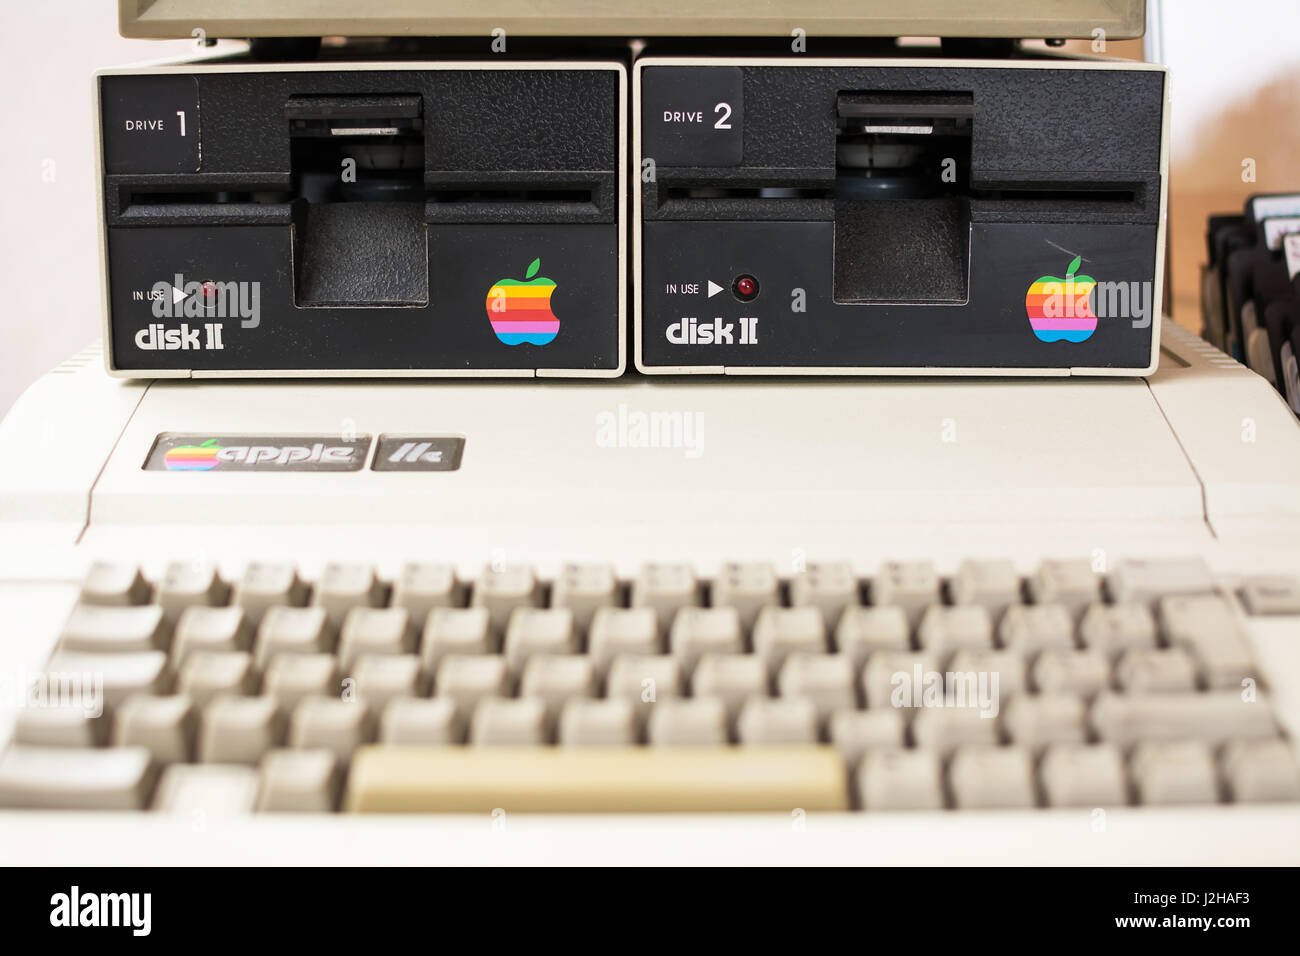 Keyboard (blurred) and disk drive  of Aged Apple computer Stock Photo